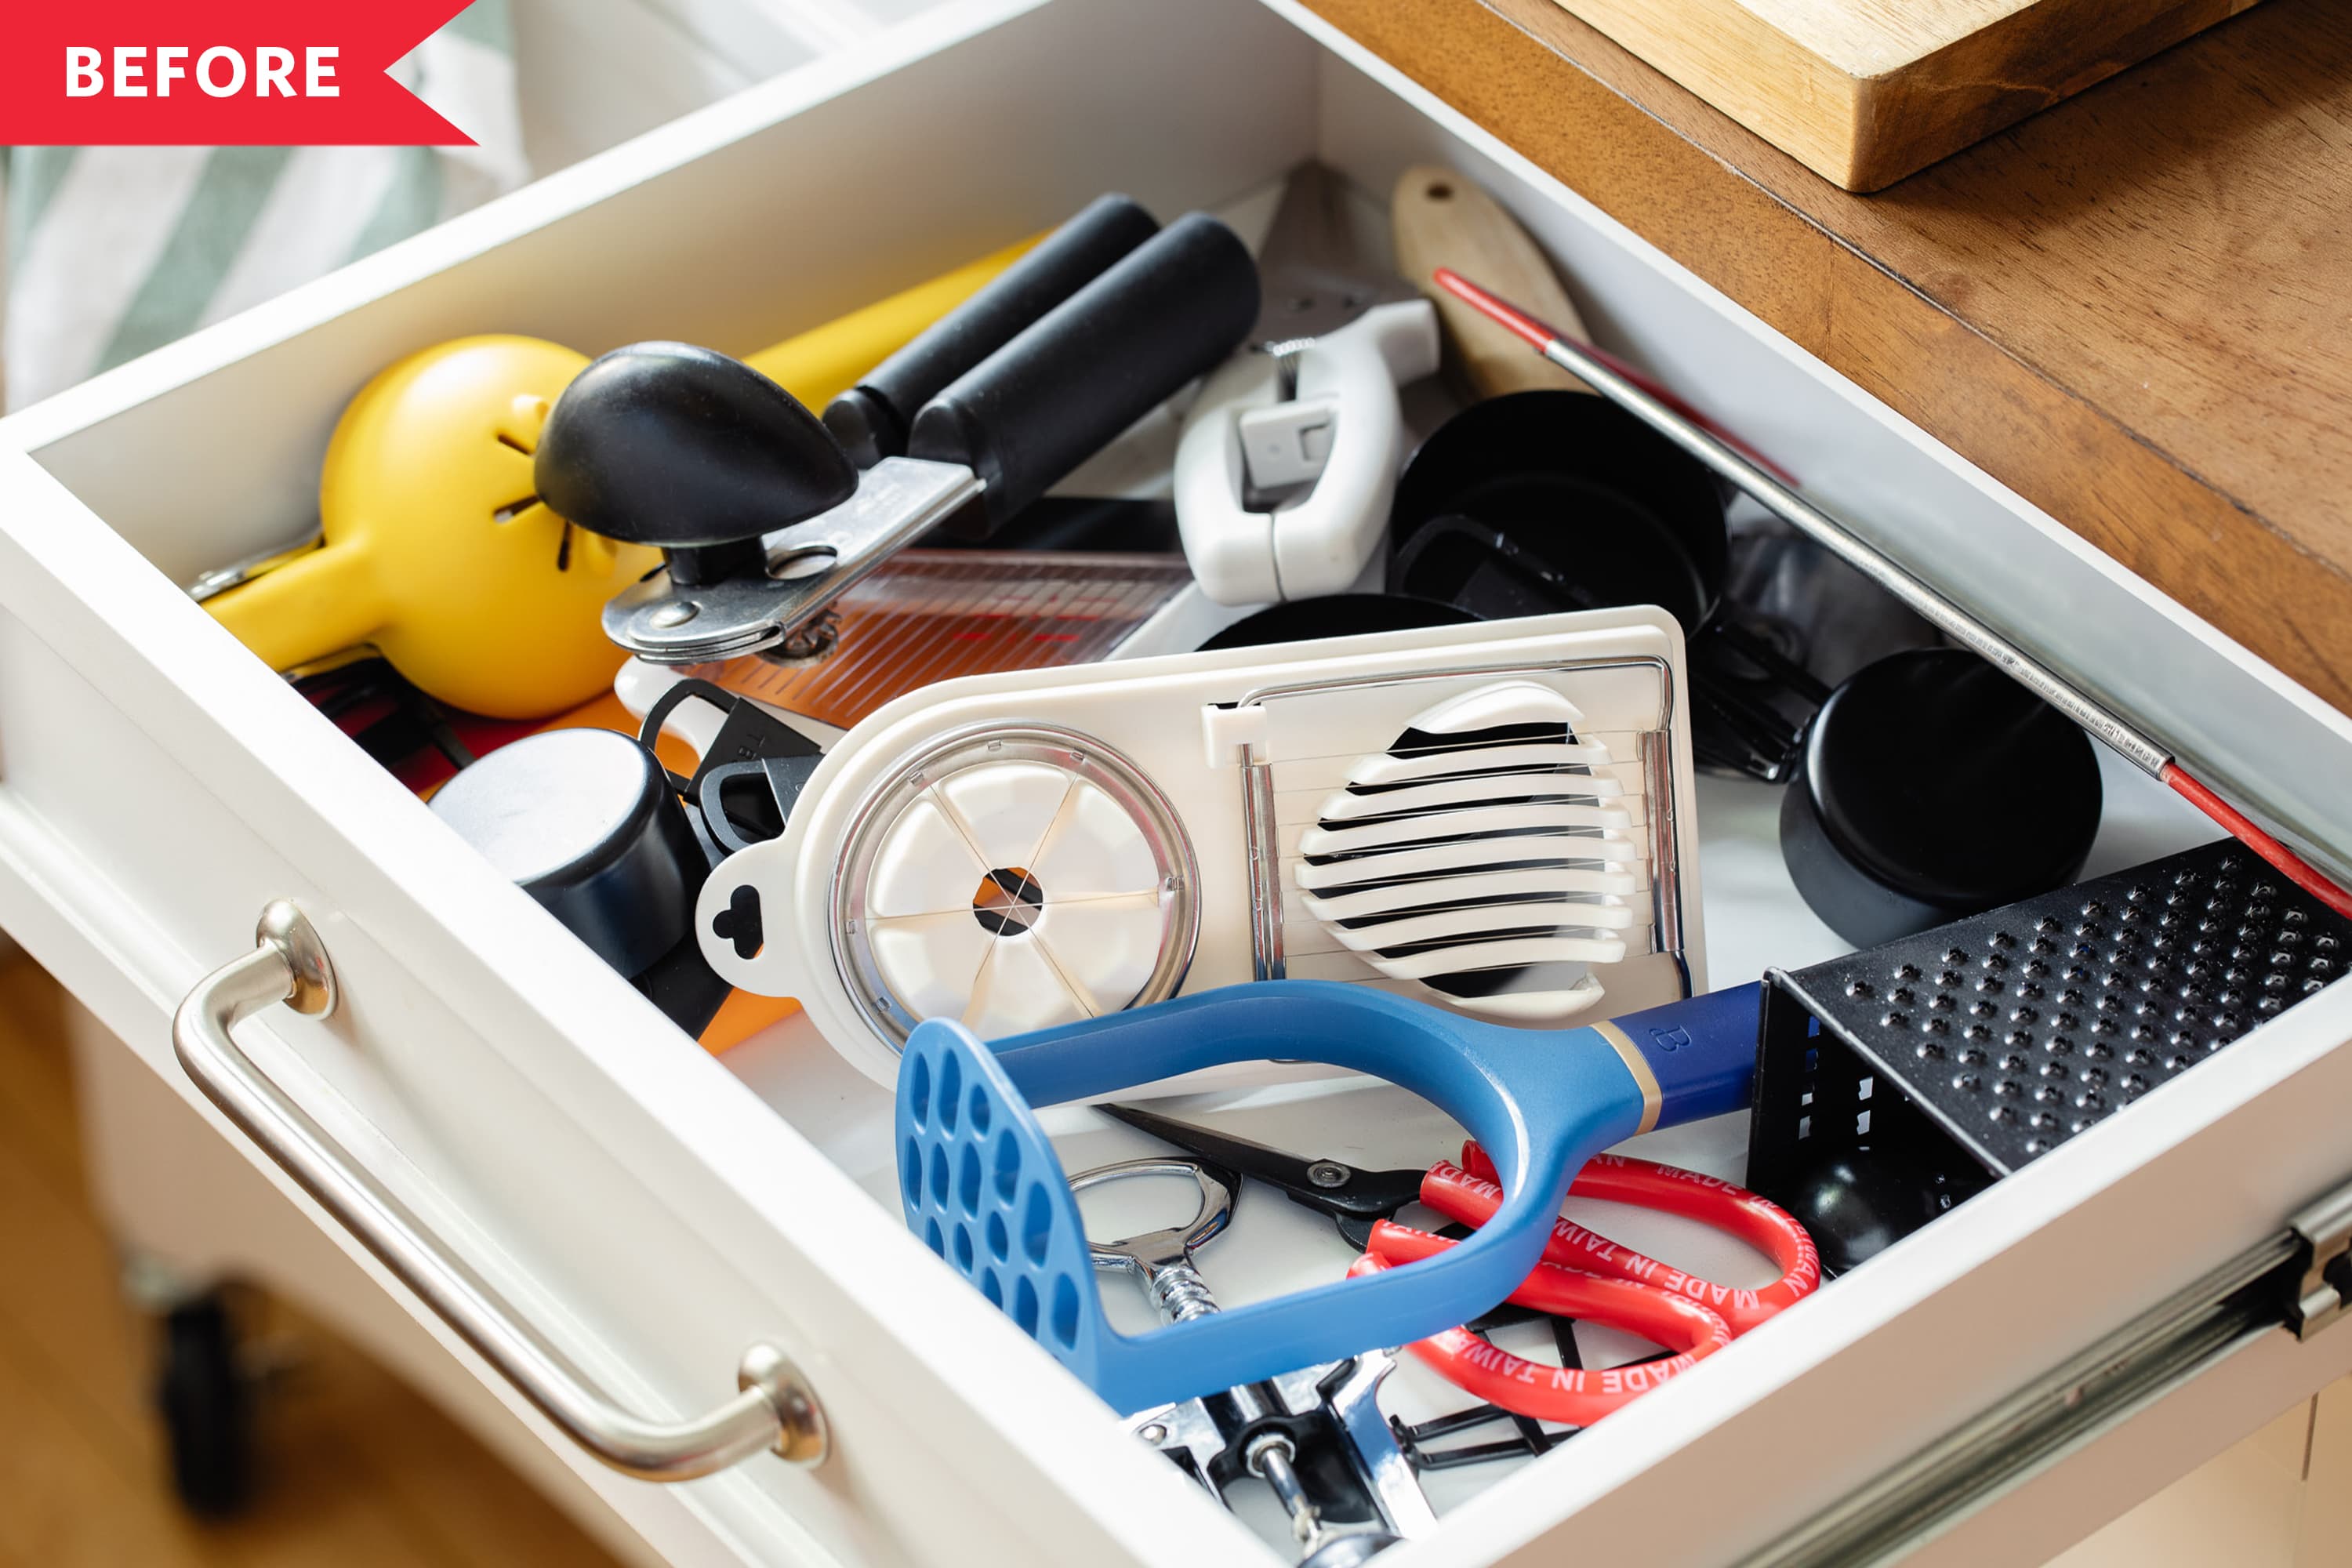 https://cdn.apartmenttherapy.info/image/upload/v1630588581/k/Photo/Lifestyle/2021-08-The-Most-Brilliant-Drawer-Organizing-Tip-That-Everyone-Needs-to-Hear/Messy-drawer-before.jpg